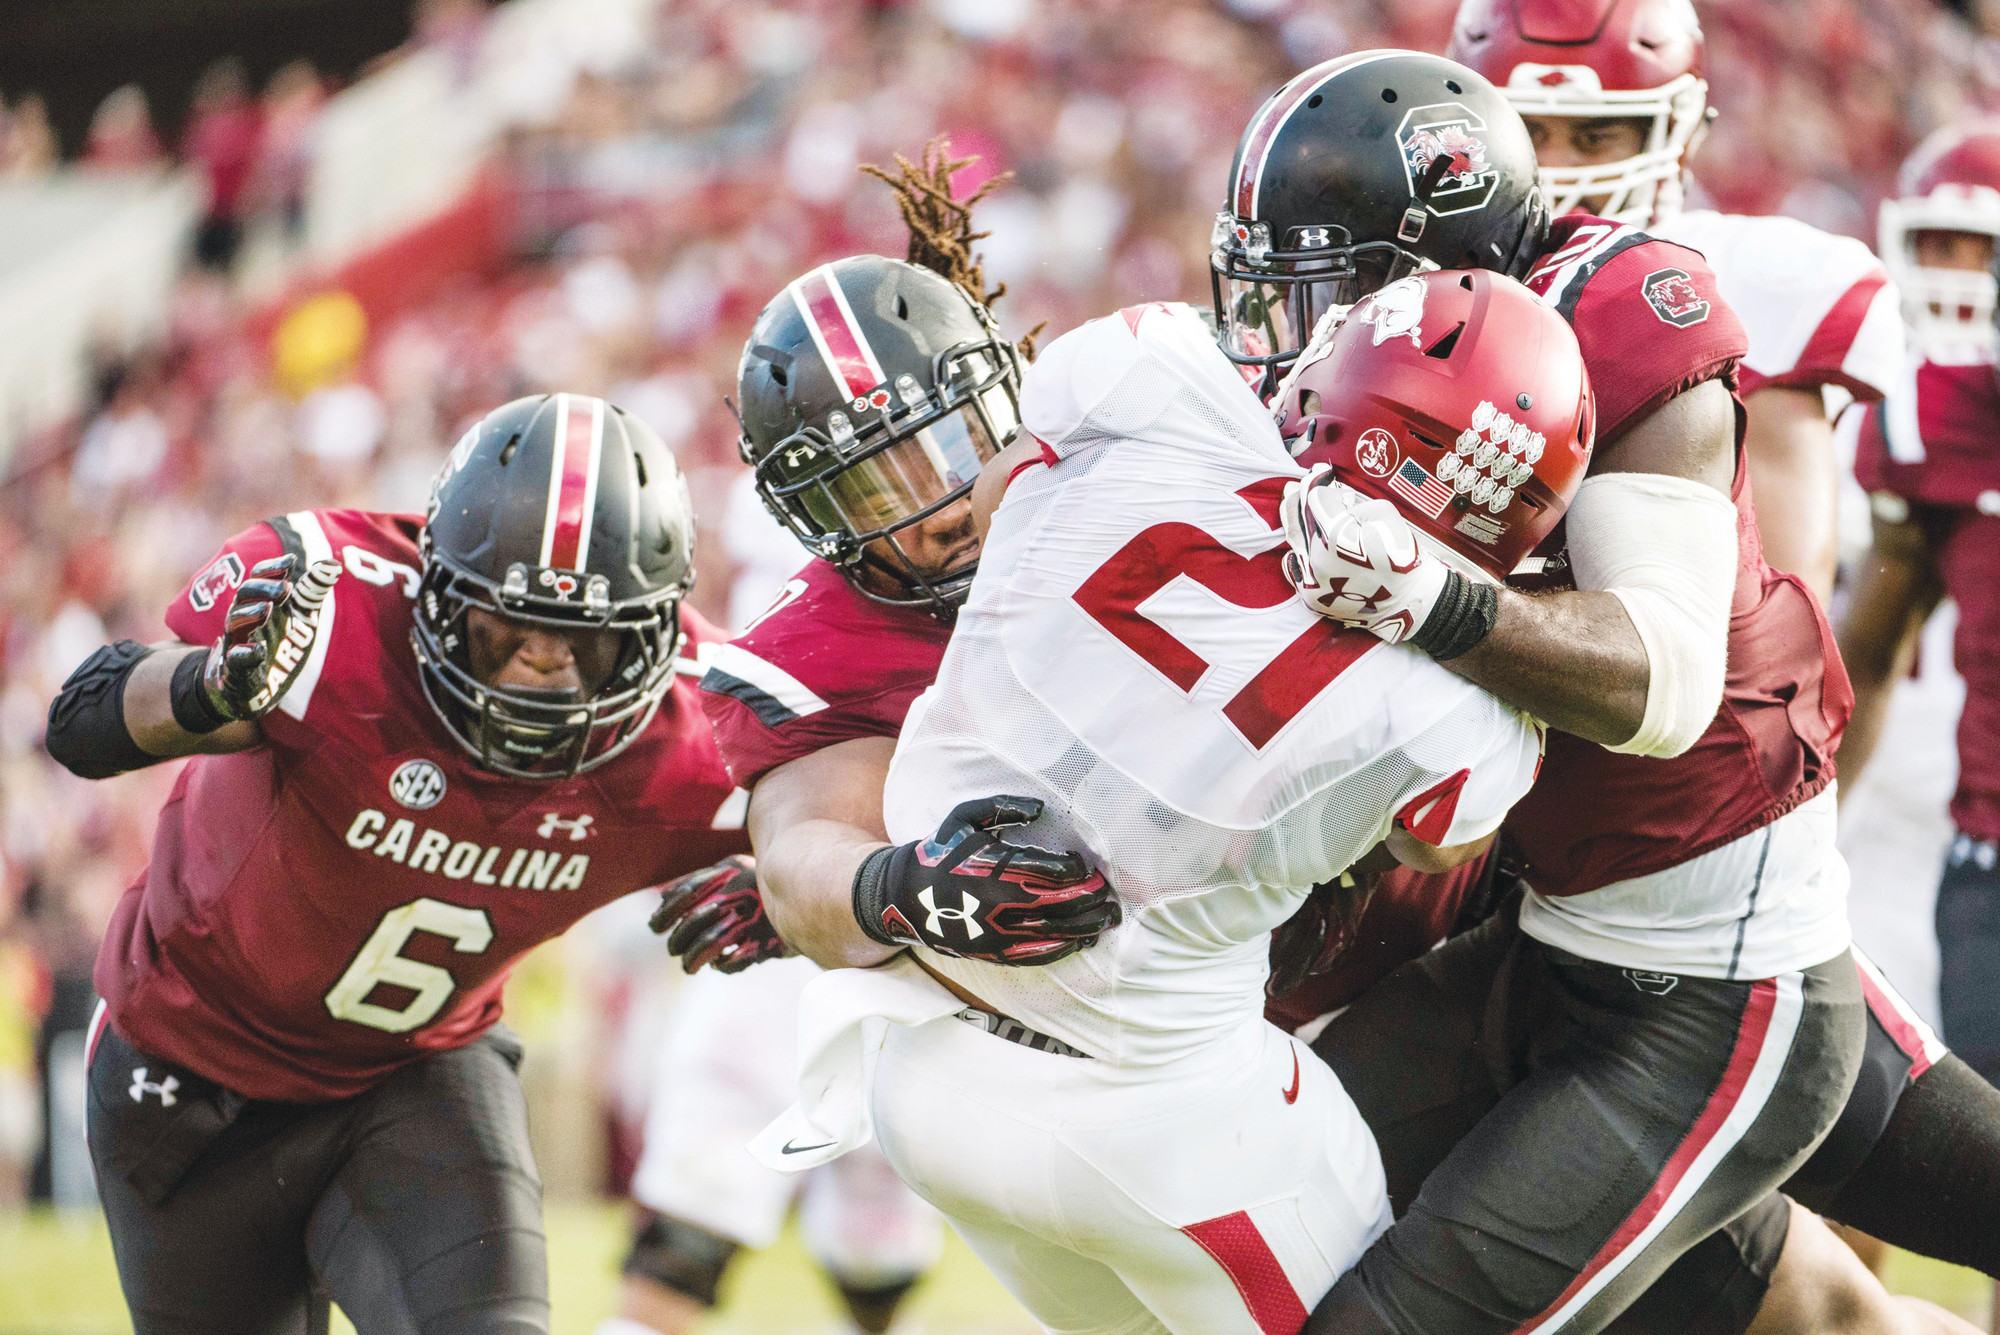 Three South Carolina defenders take down Arkansas running back Devwah Whaley (21) last season. Gamecock head coach Will Muschamp is looking for improvement from his team this season after going 9-4 last year.